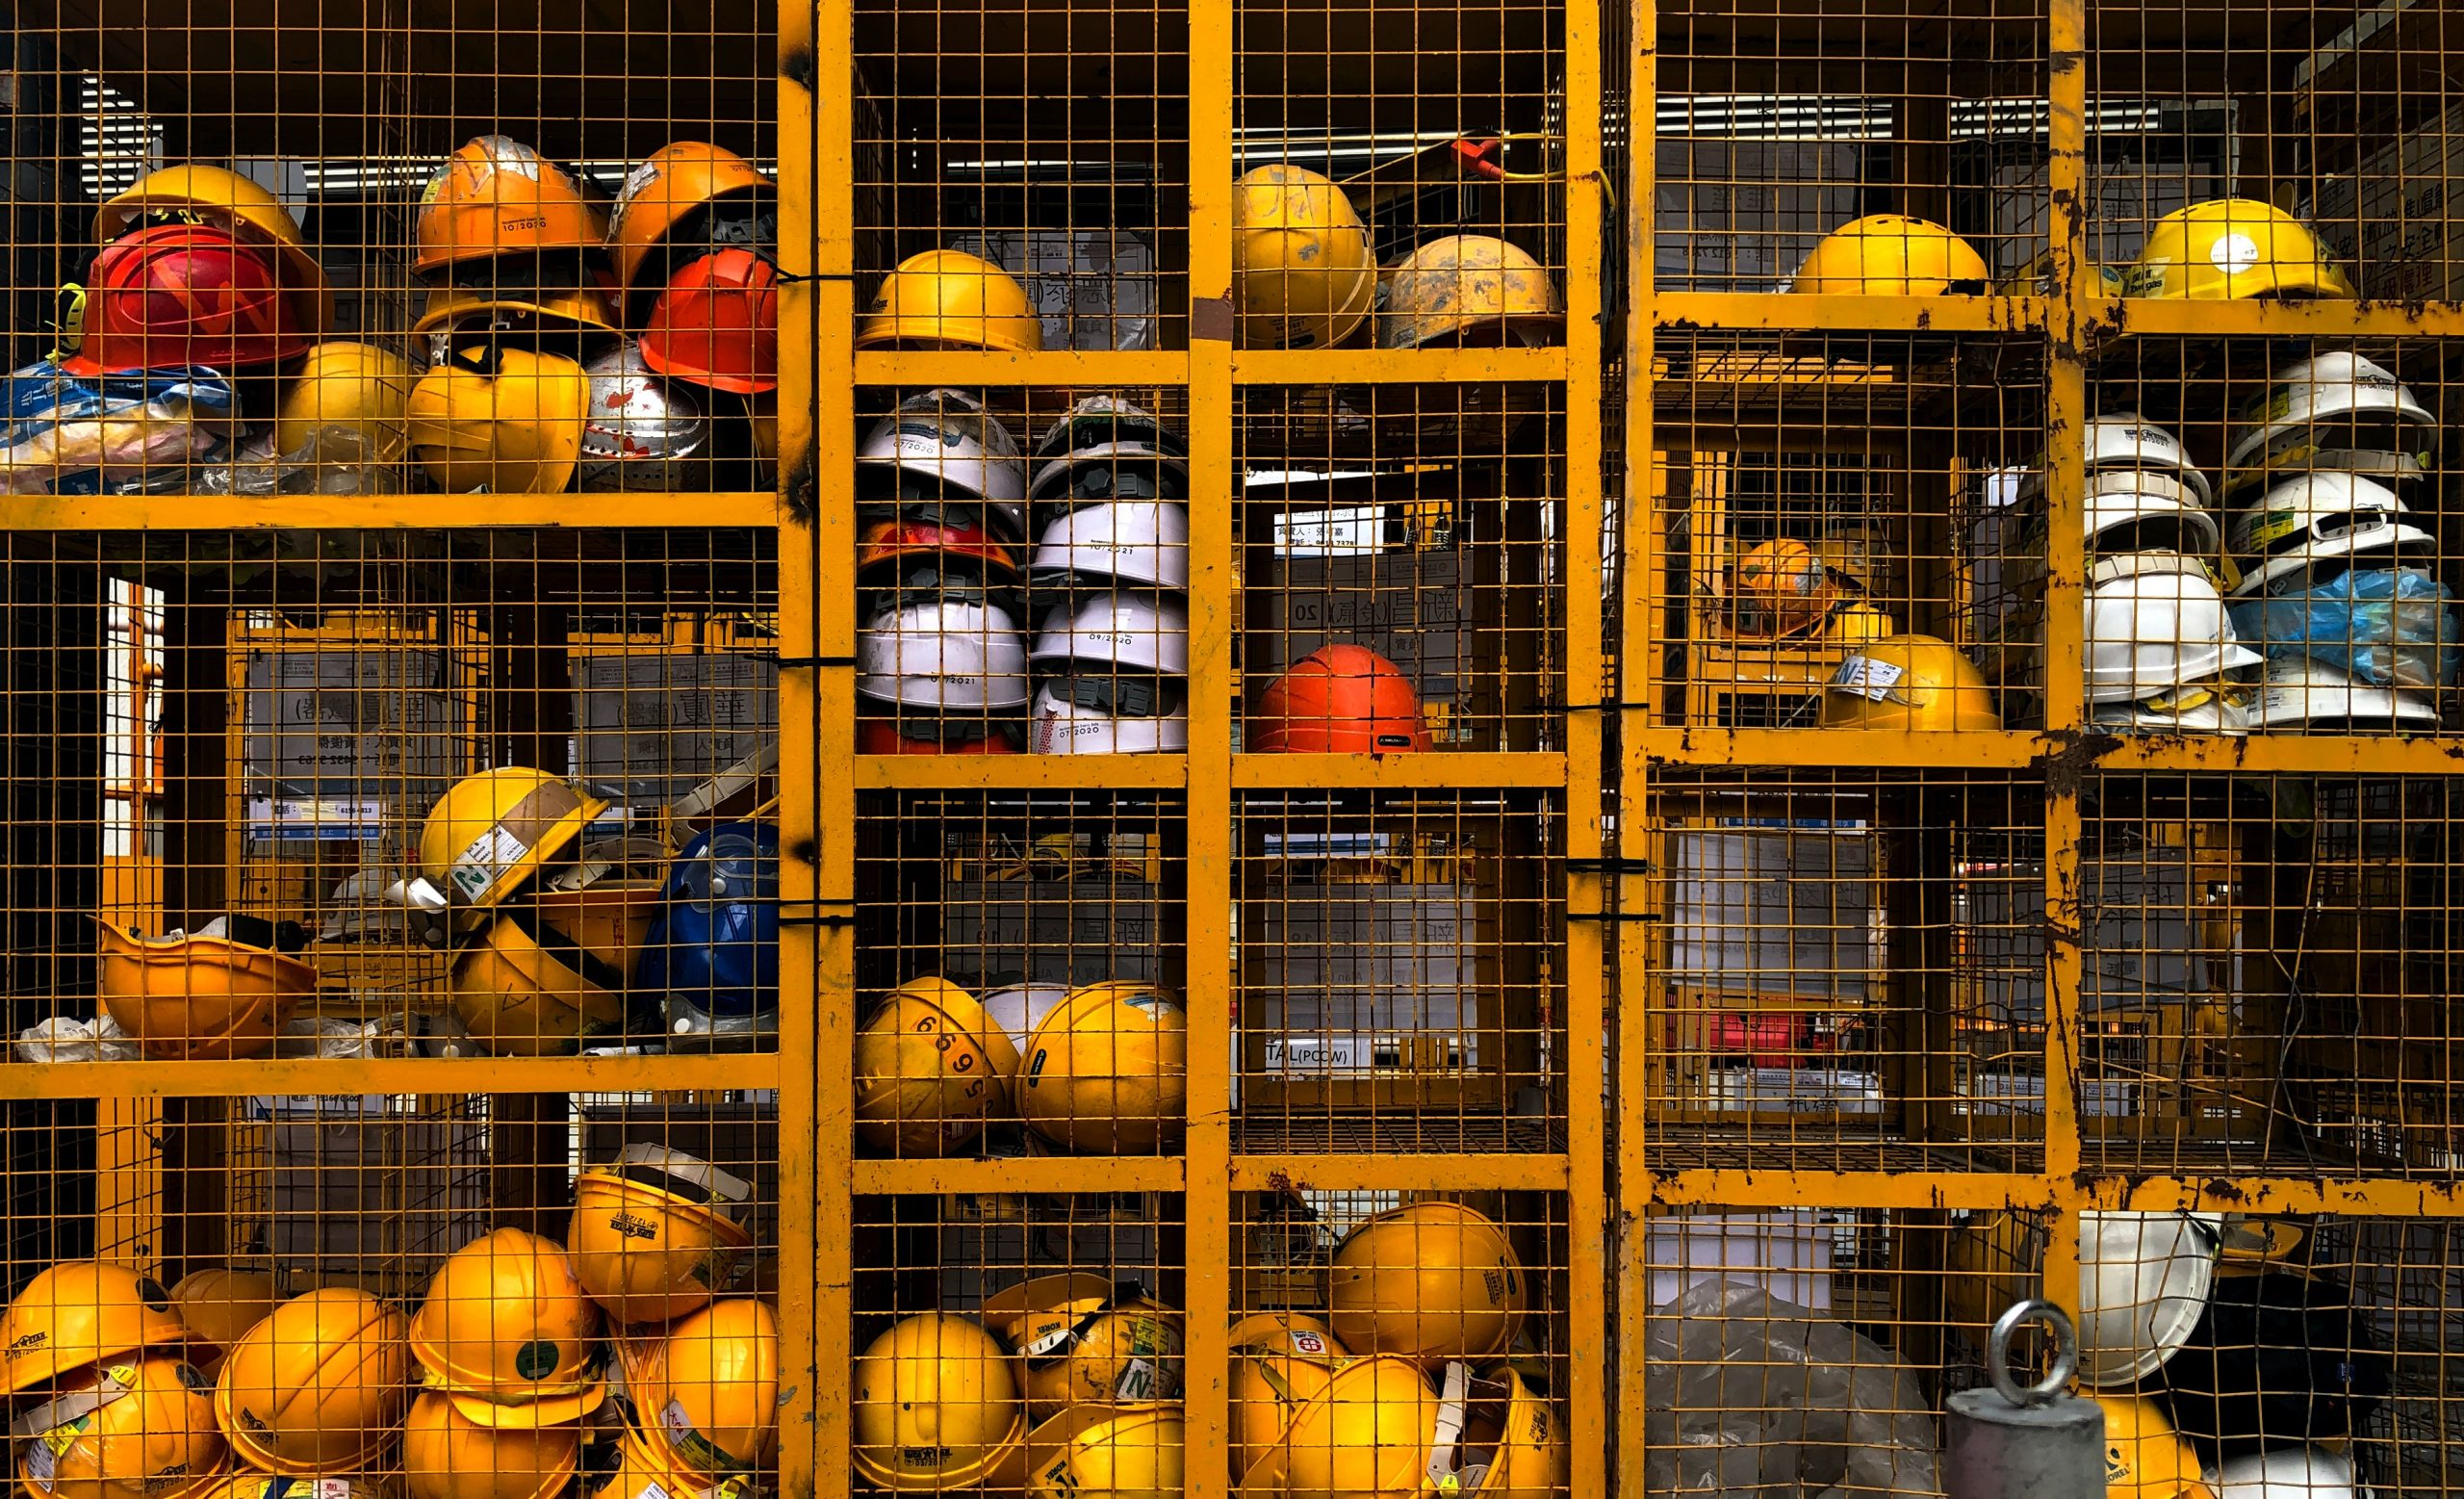 Occupational Health and Safety: Warehouse Safety in a Modern Era